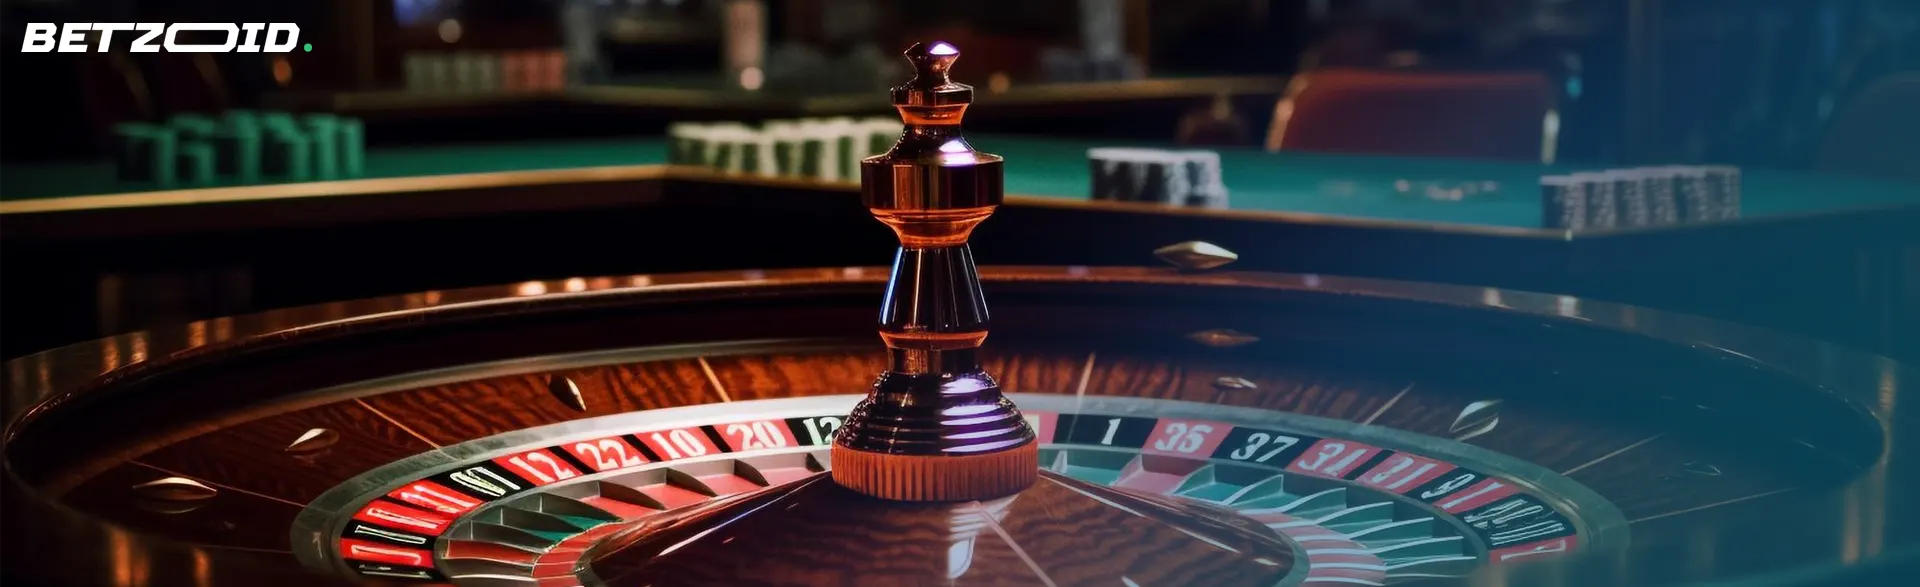 Table games at online casinos with live roulette in Canada.